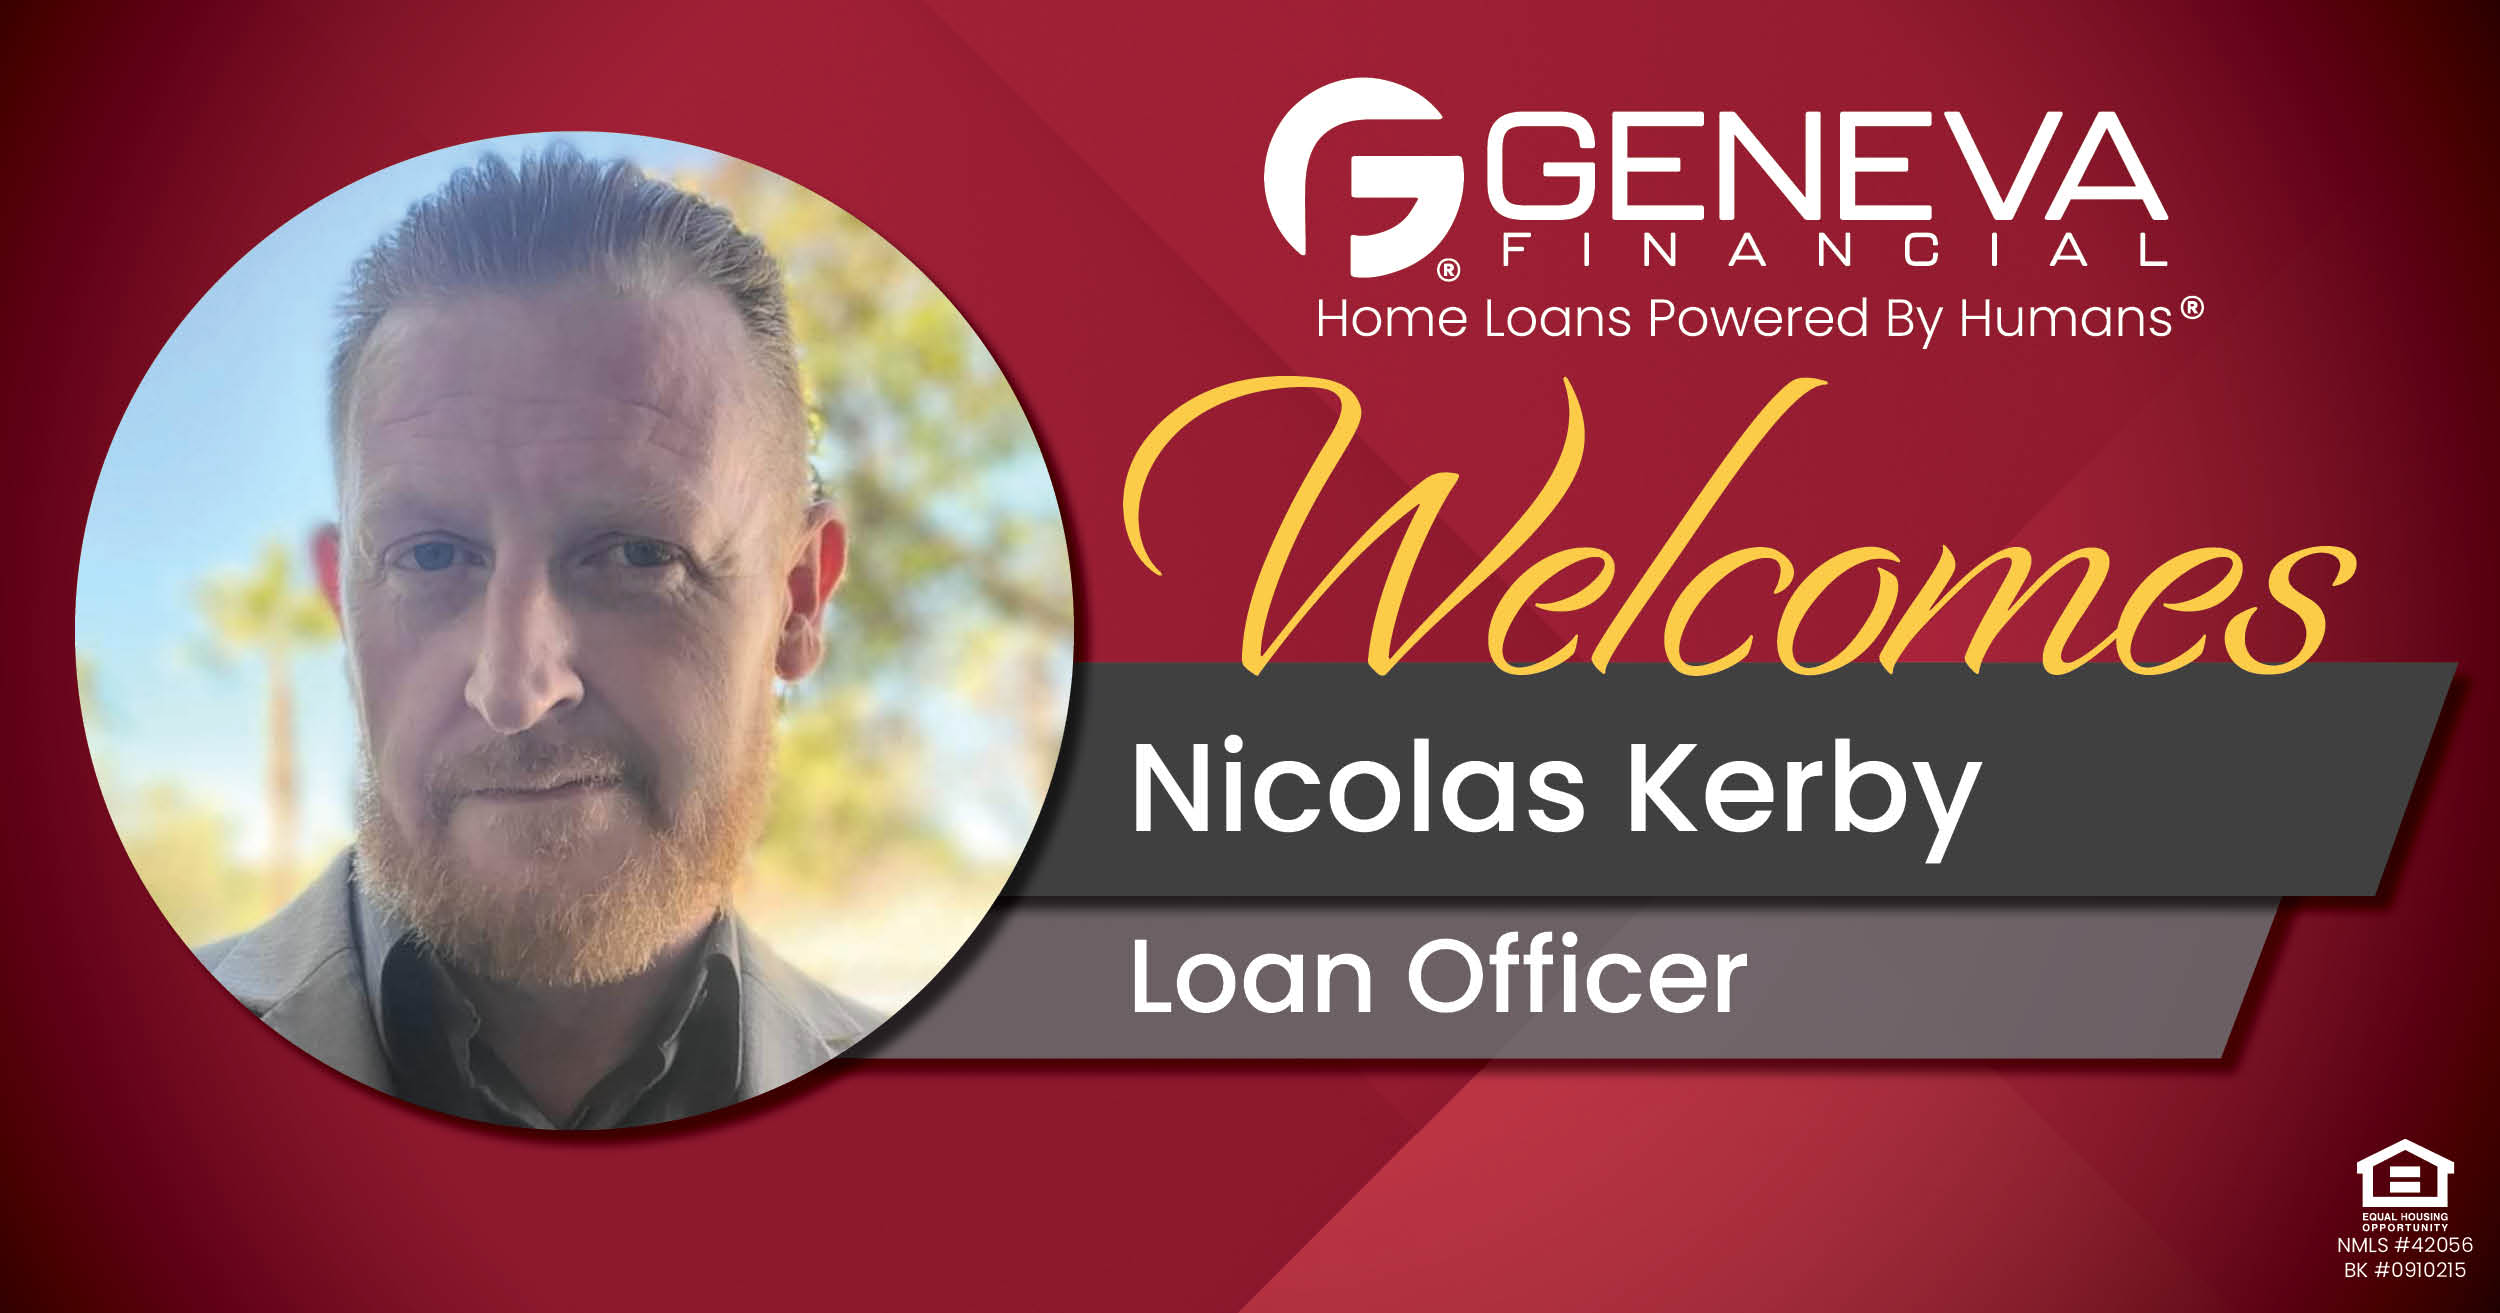 Geneva Financial Welcomes New Loan Officer Nicolas Kerby to California Market – Home Loans Powered by Humans®.